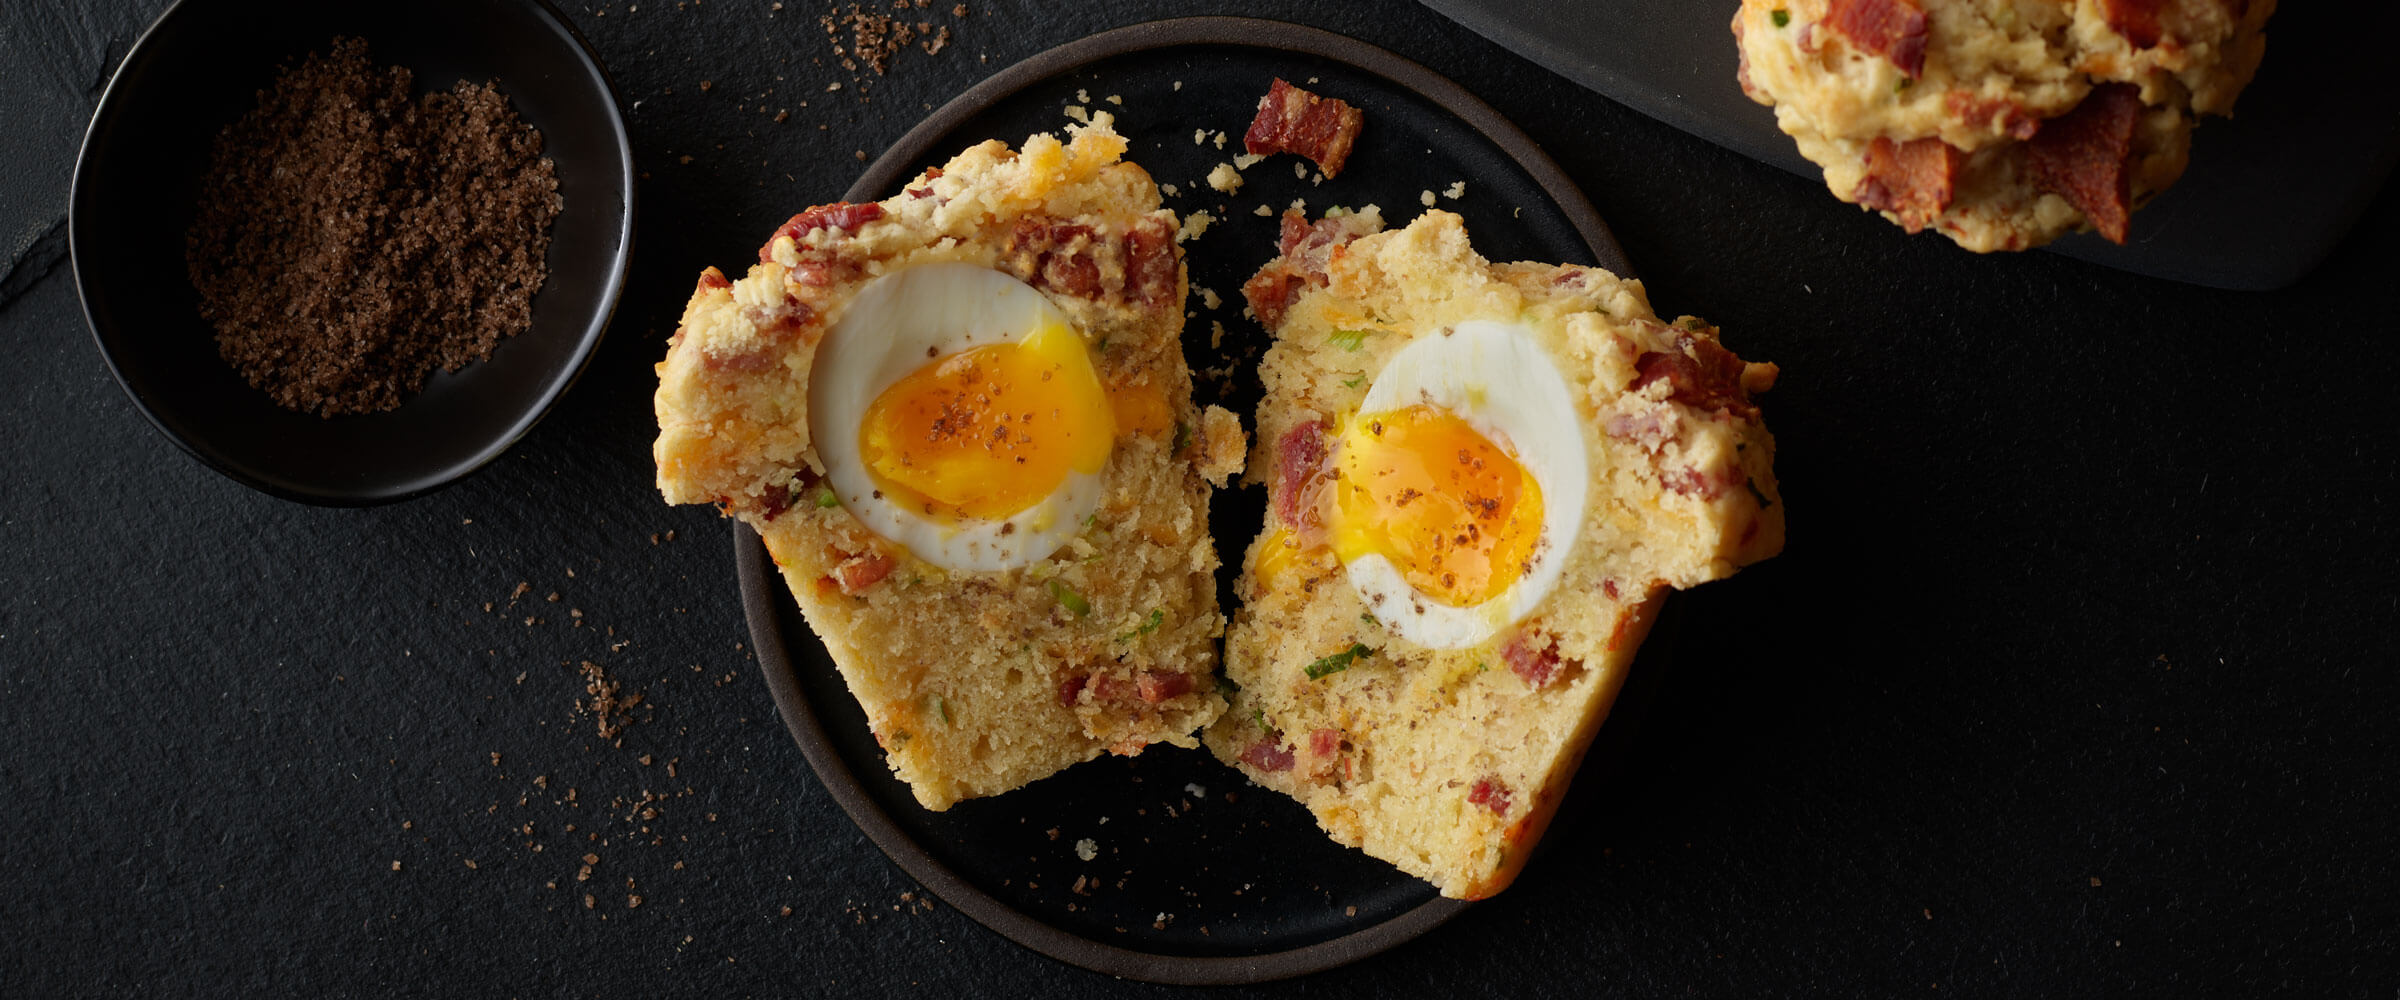 Bacon and Egg Breakfast Muffins cut open on black plate